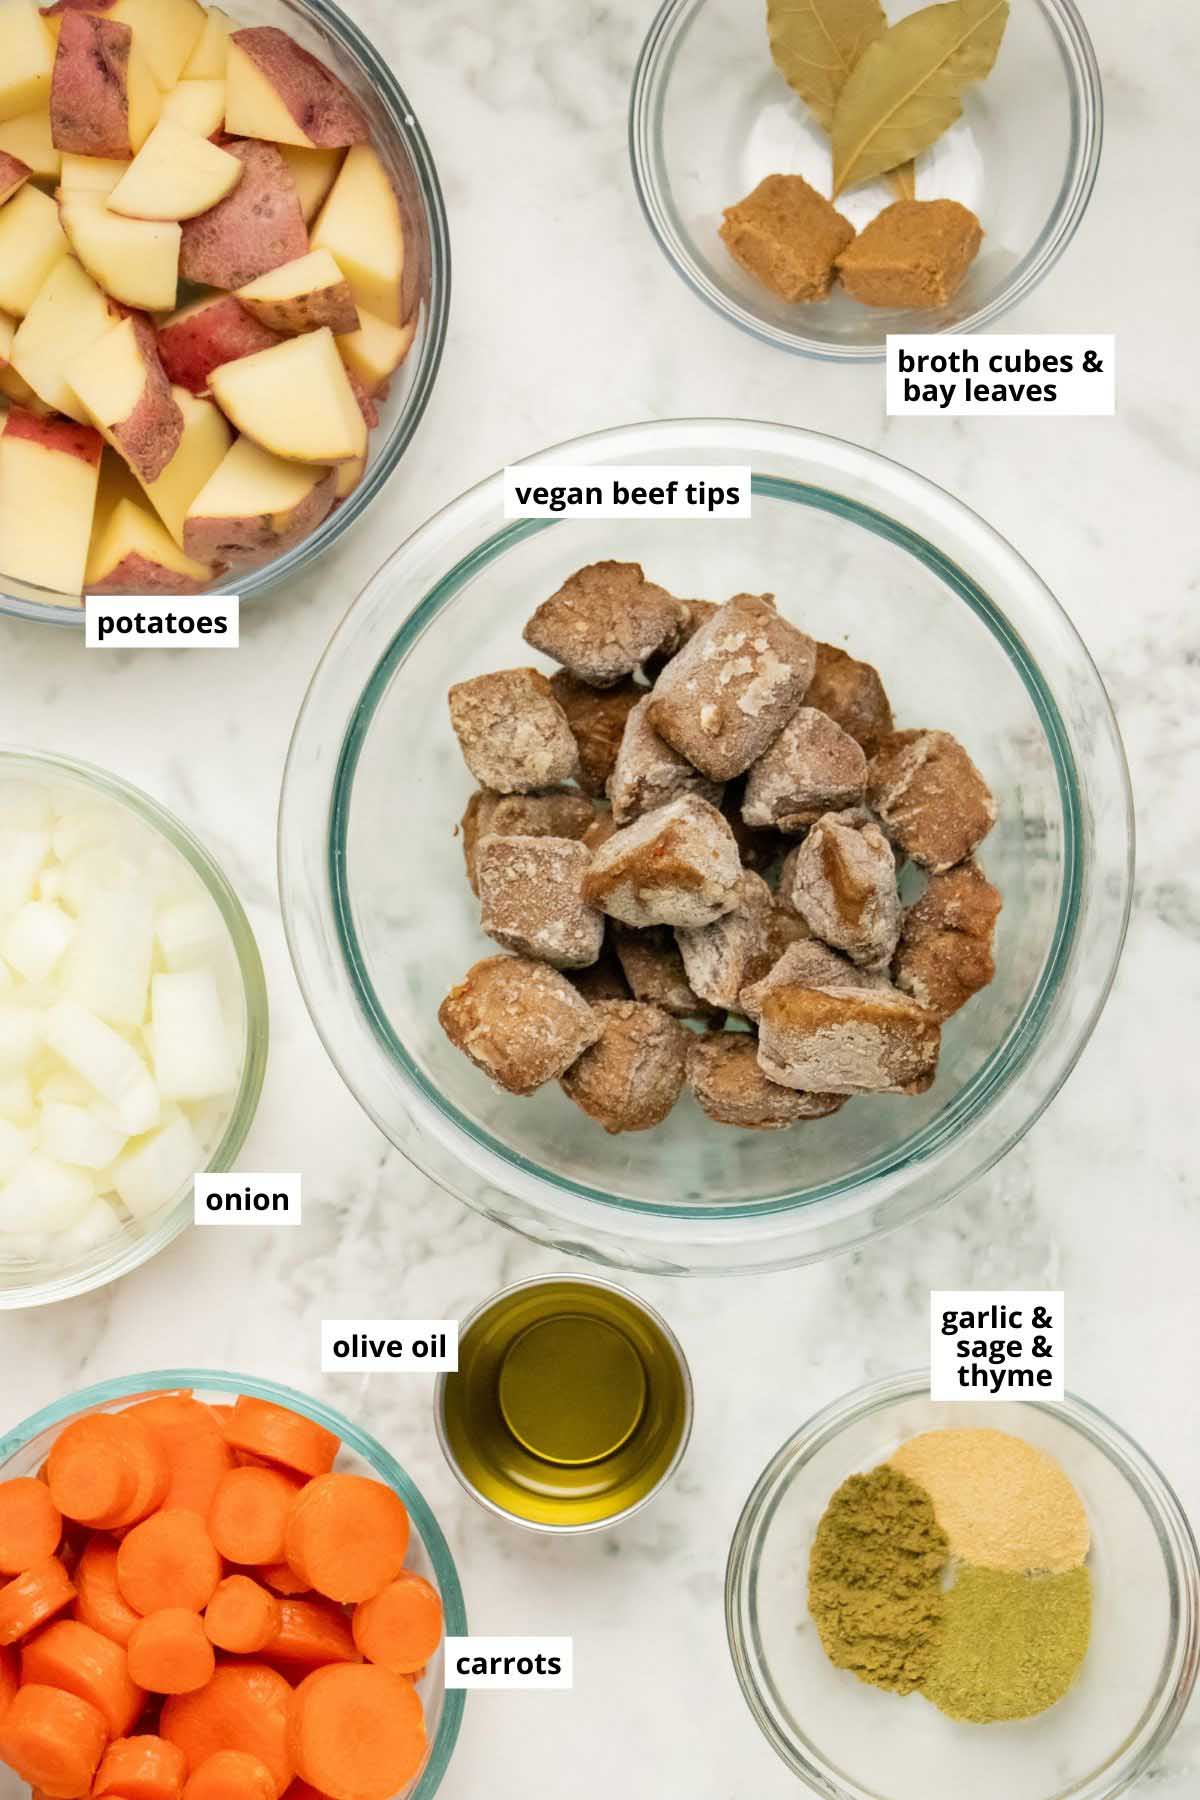 vegan beef tips, potatoes, carrots, and other stew ingredients in bowls on a white table